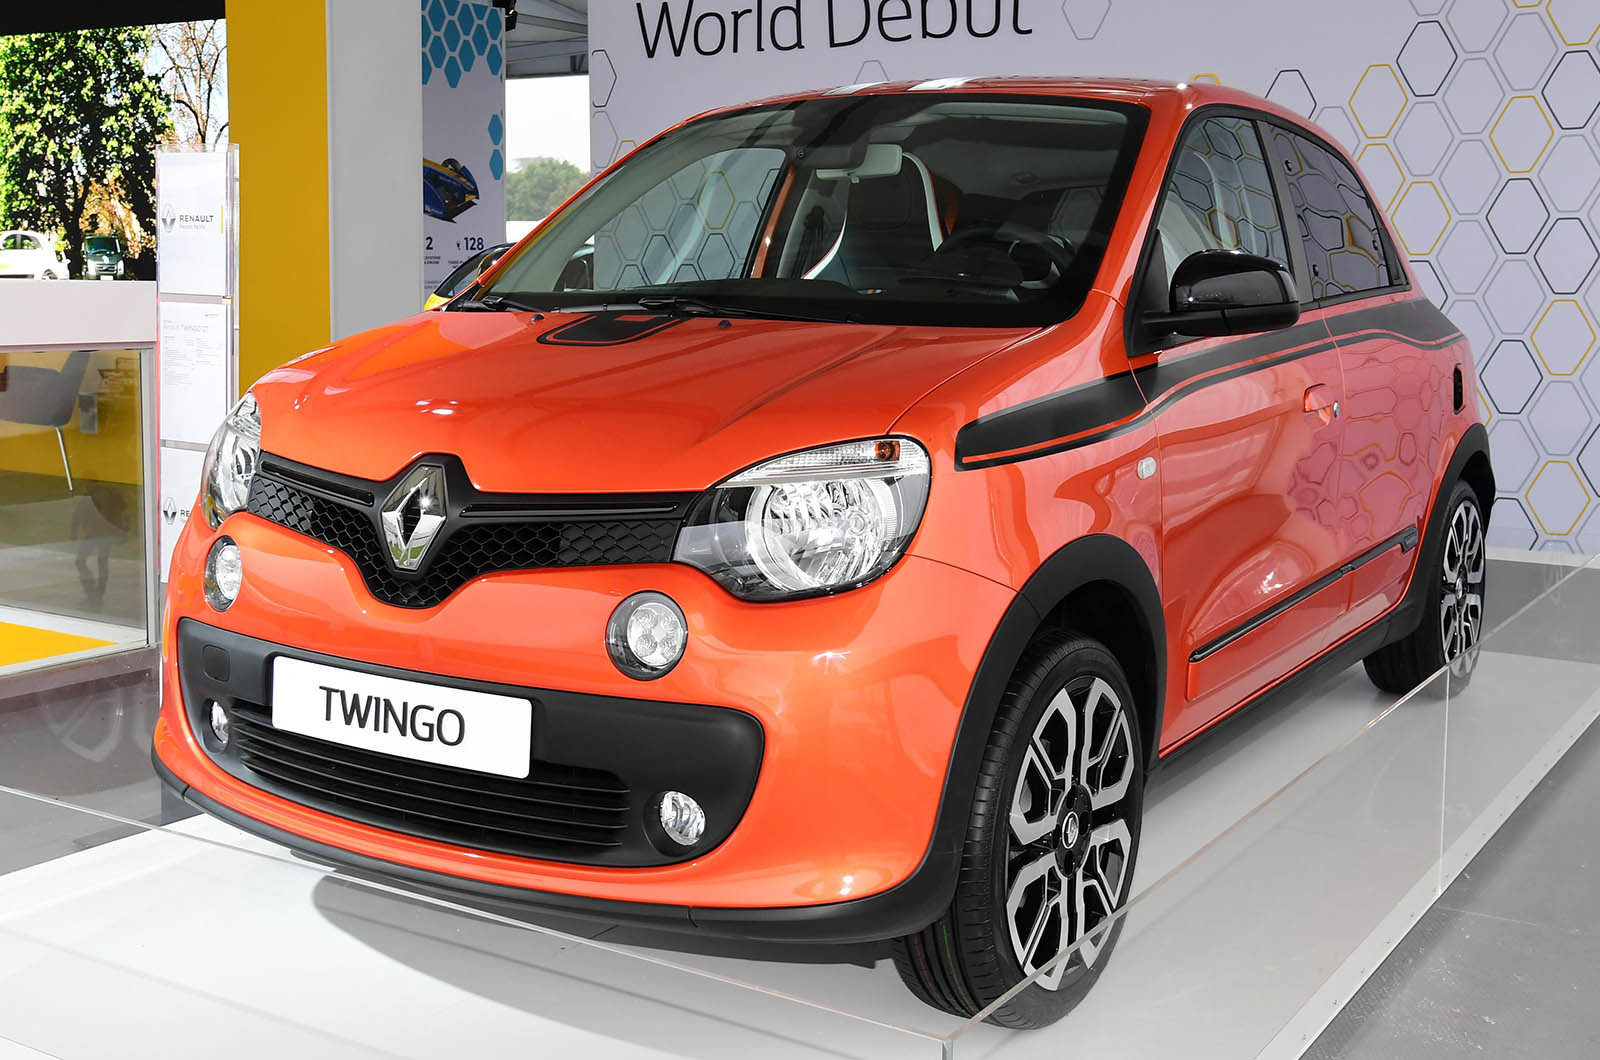 Renault Twingo GT and Dynamique S pricing revealed